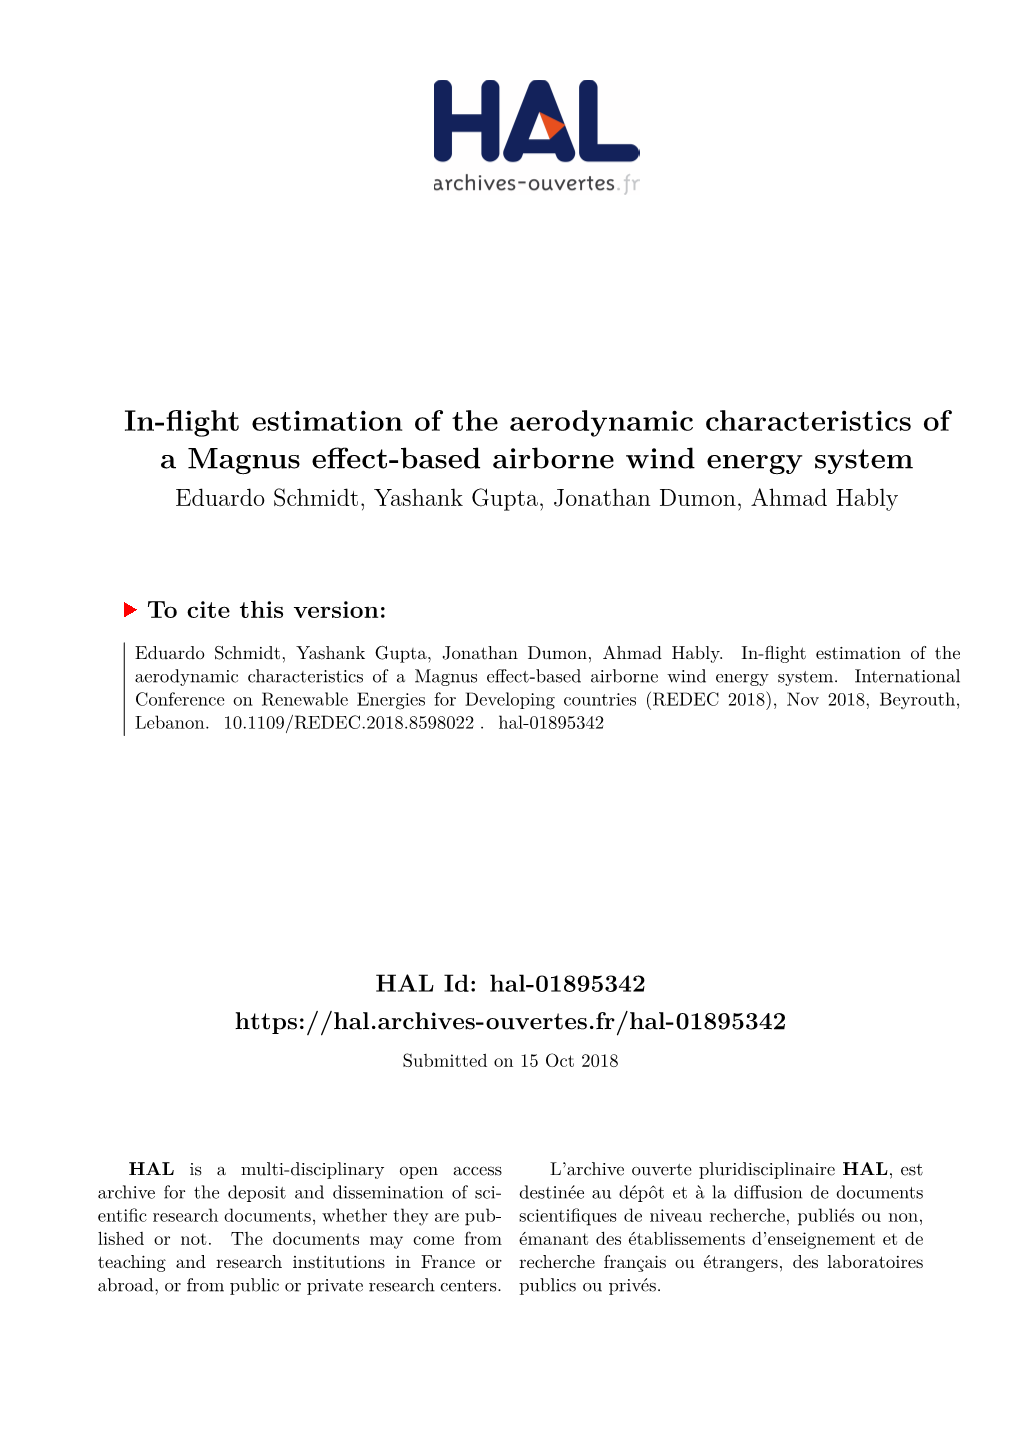 In-Flight Estimation of the Aerodynamic Characteristics of a Magnus Effect-Based Airborne Wind Energy System